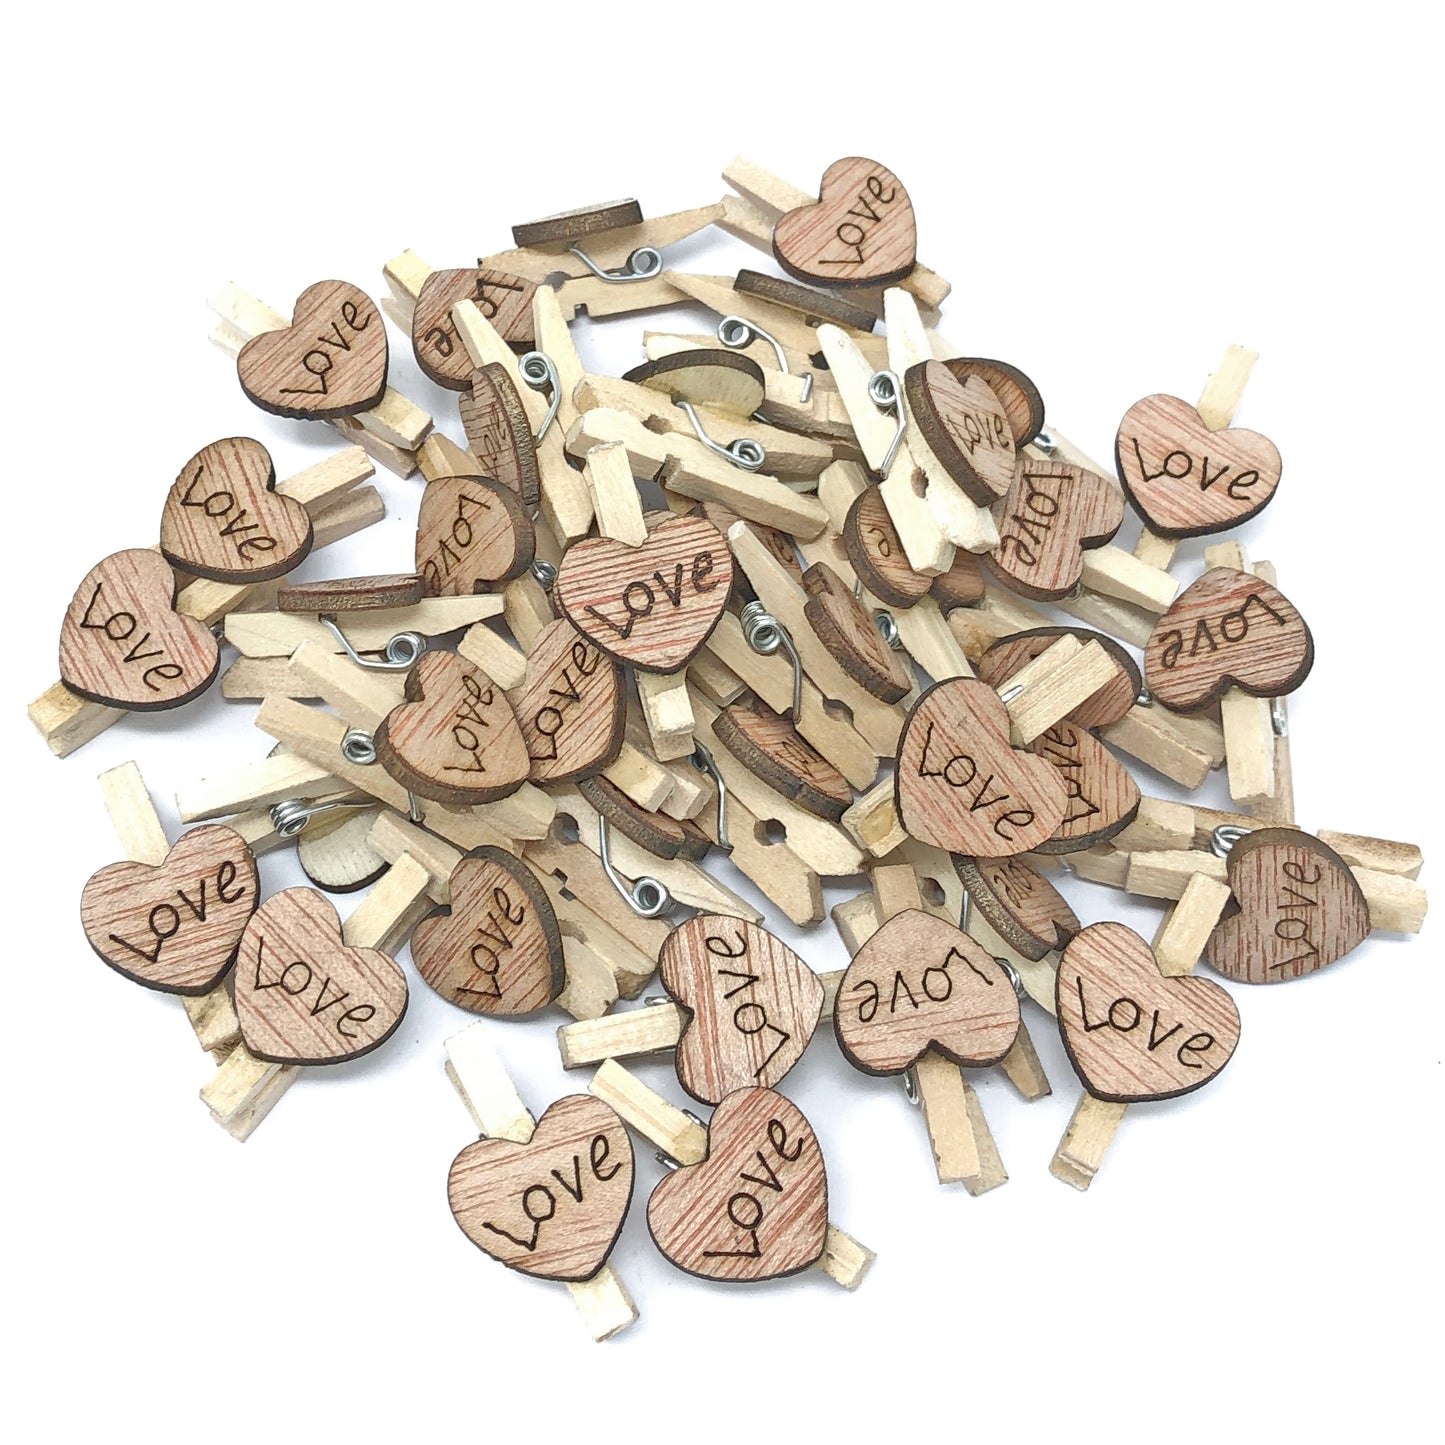 'Love' 25mm Clothes Peg with 15mm Rustic Hearts